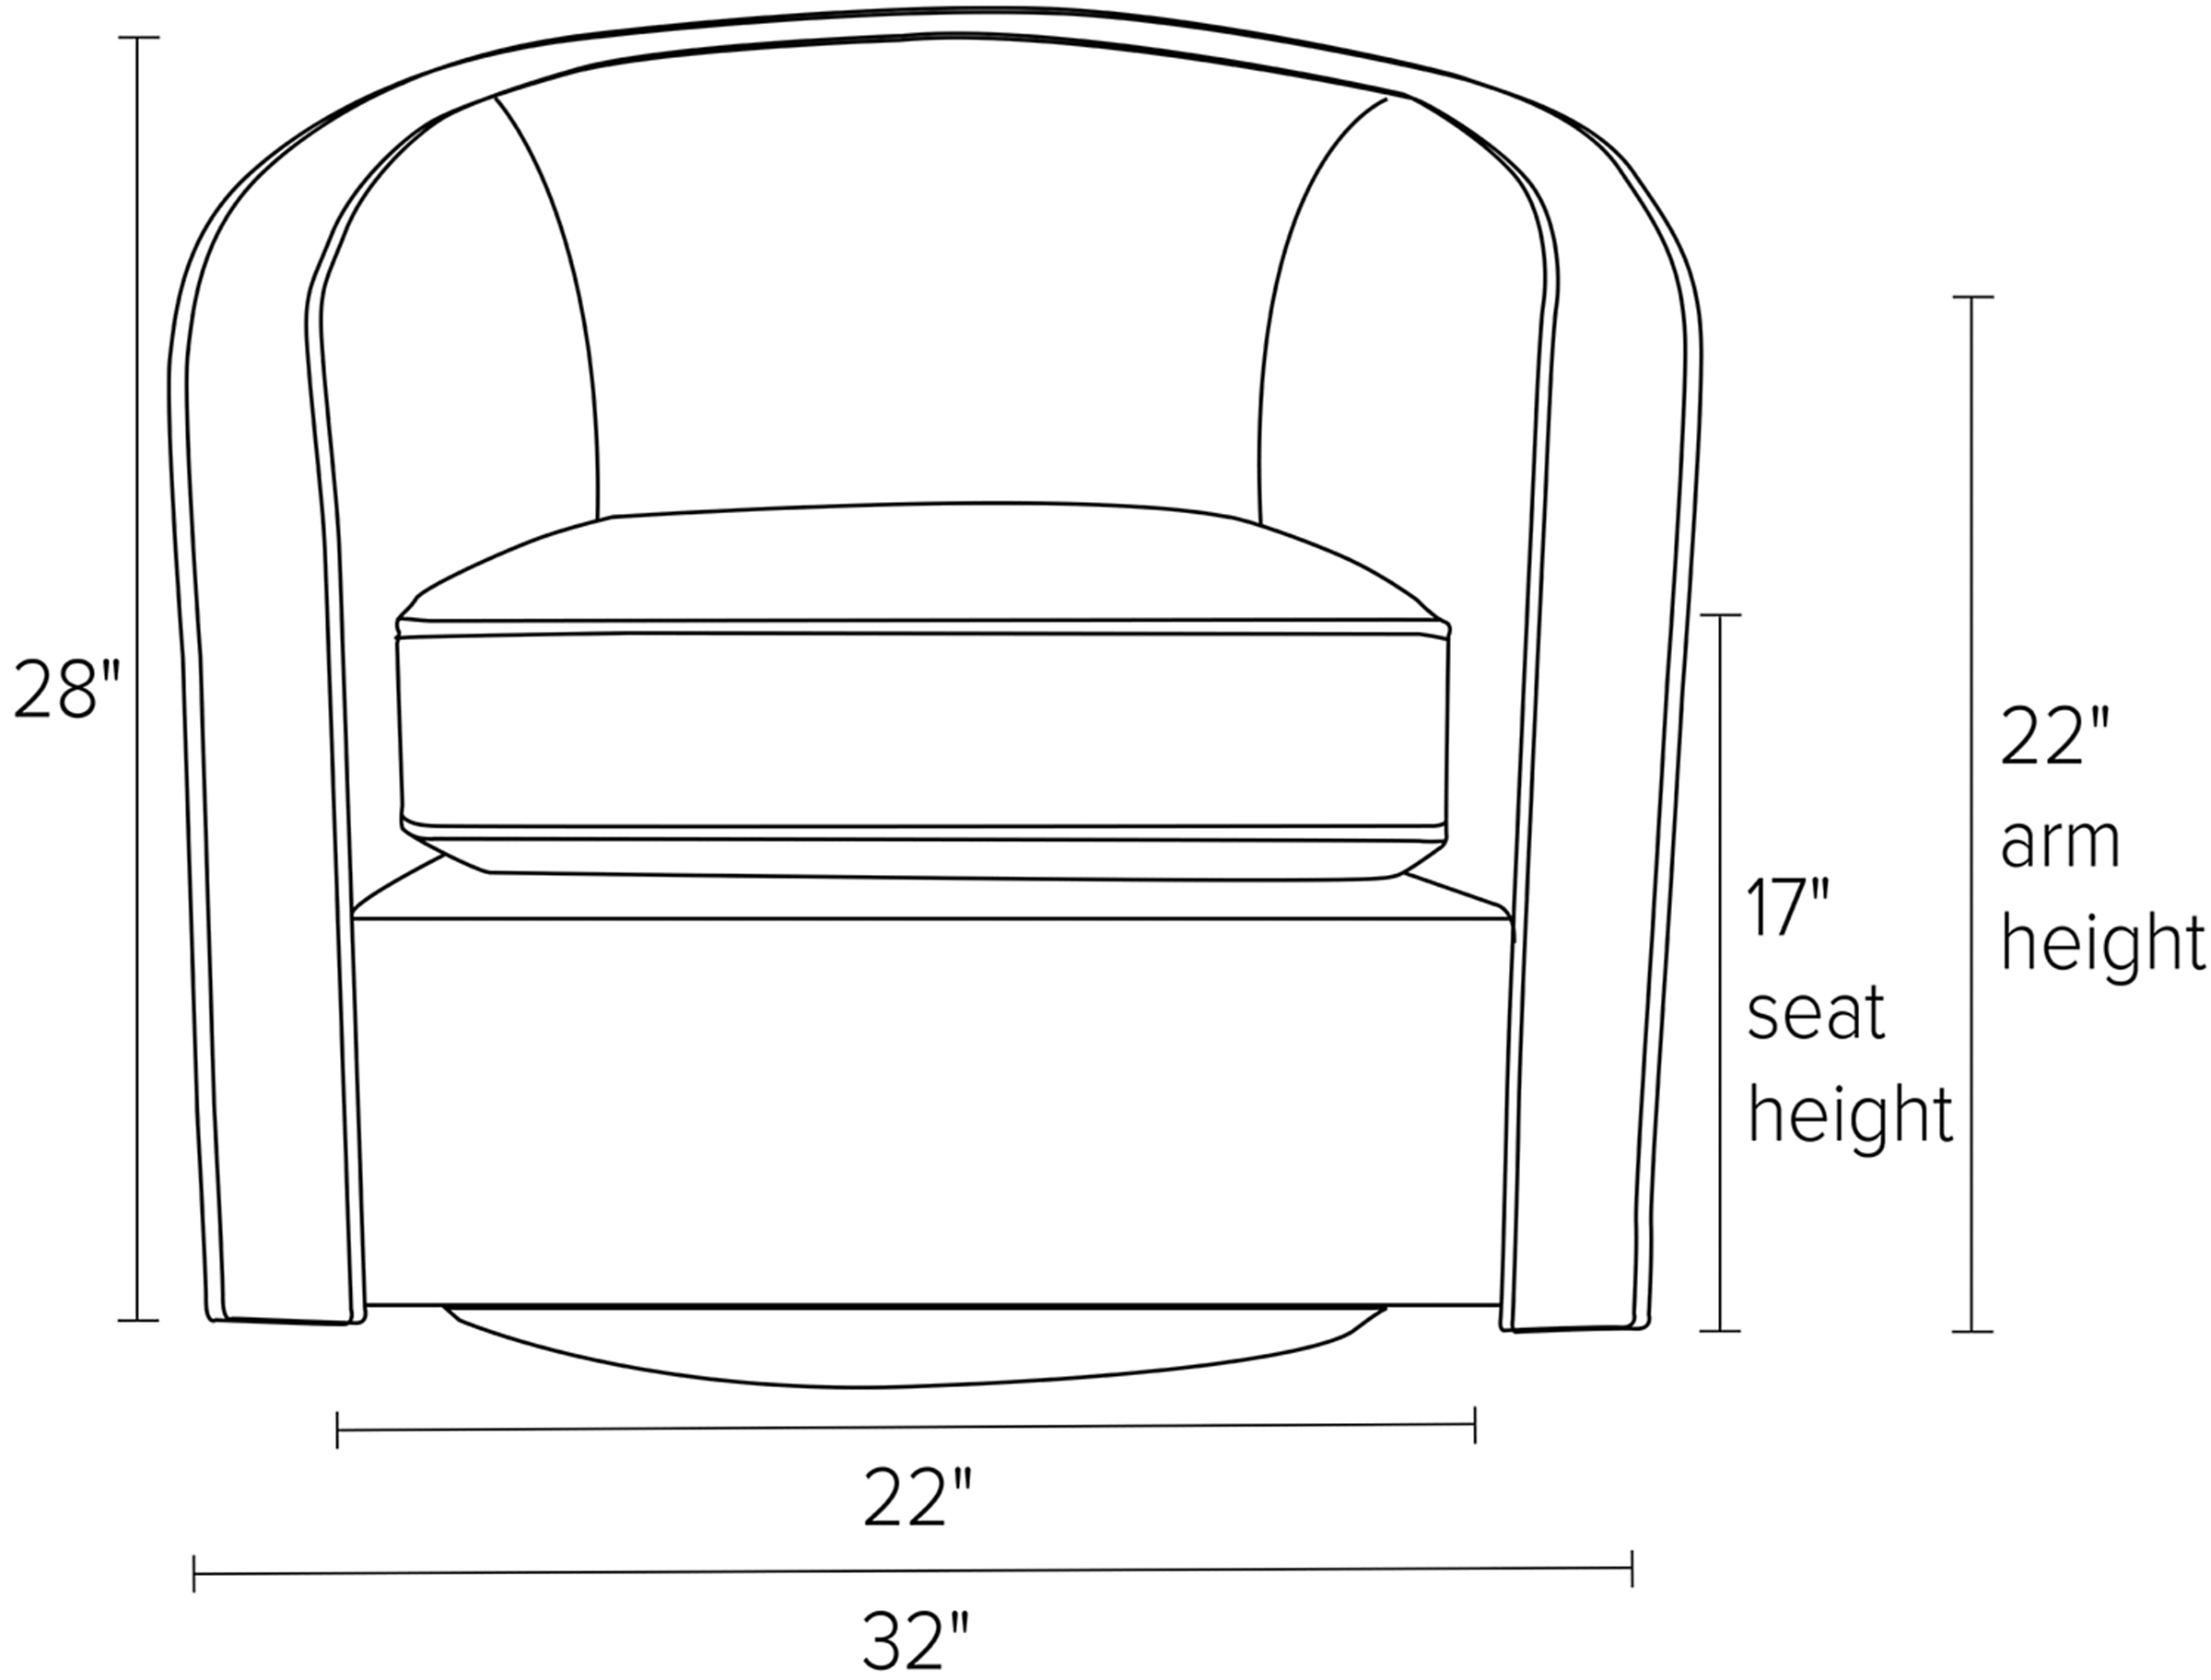 Front view dimension illustration of Amos chair.